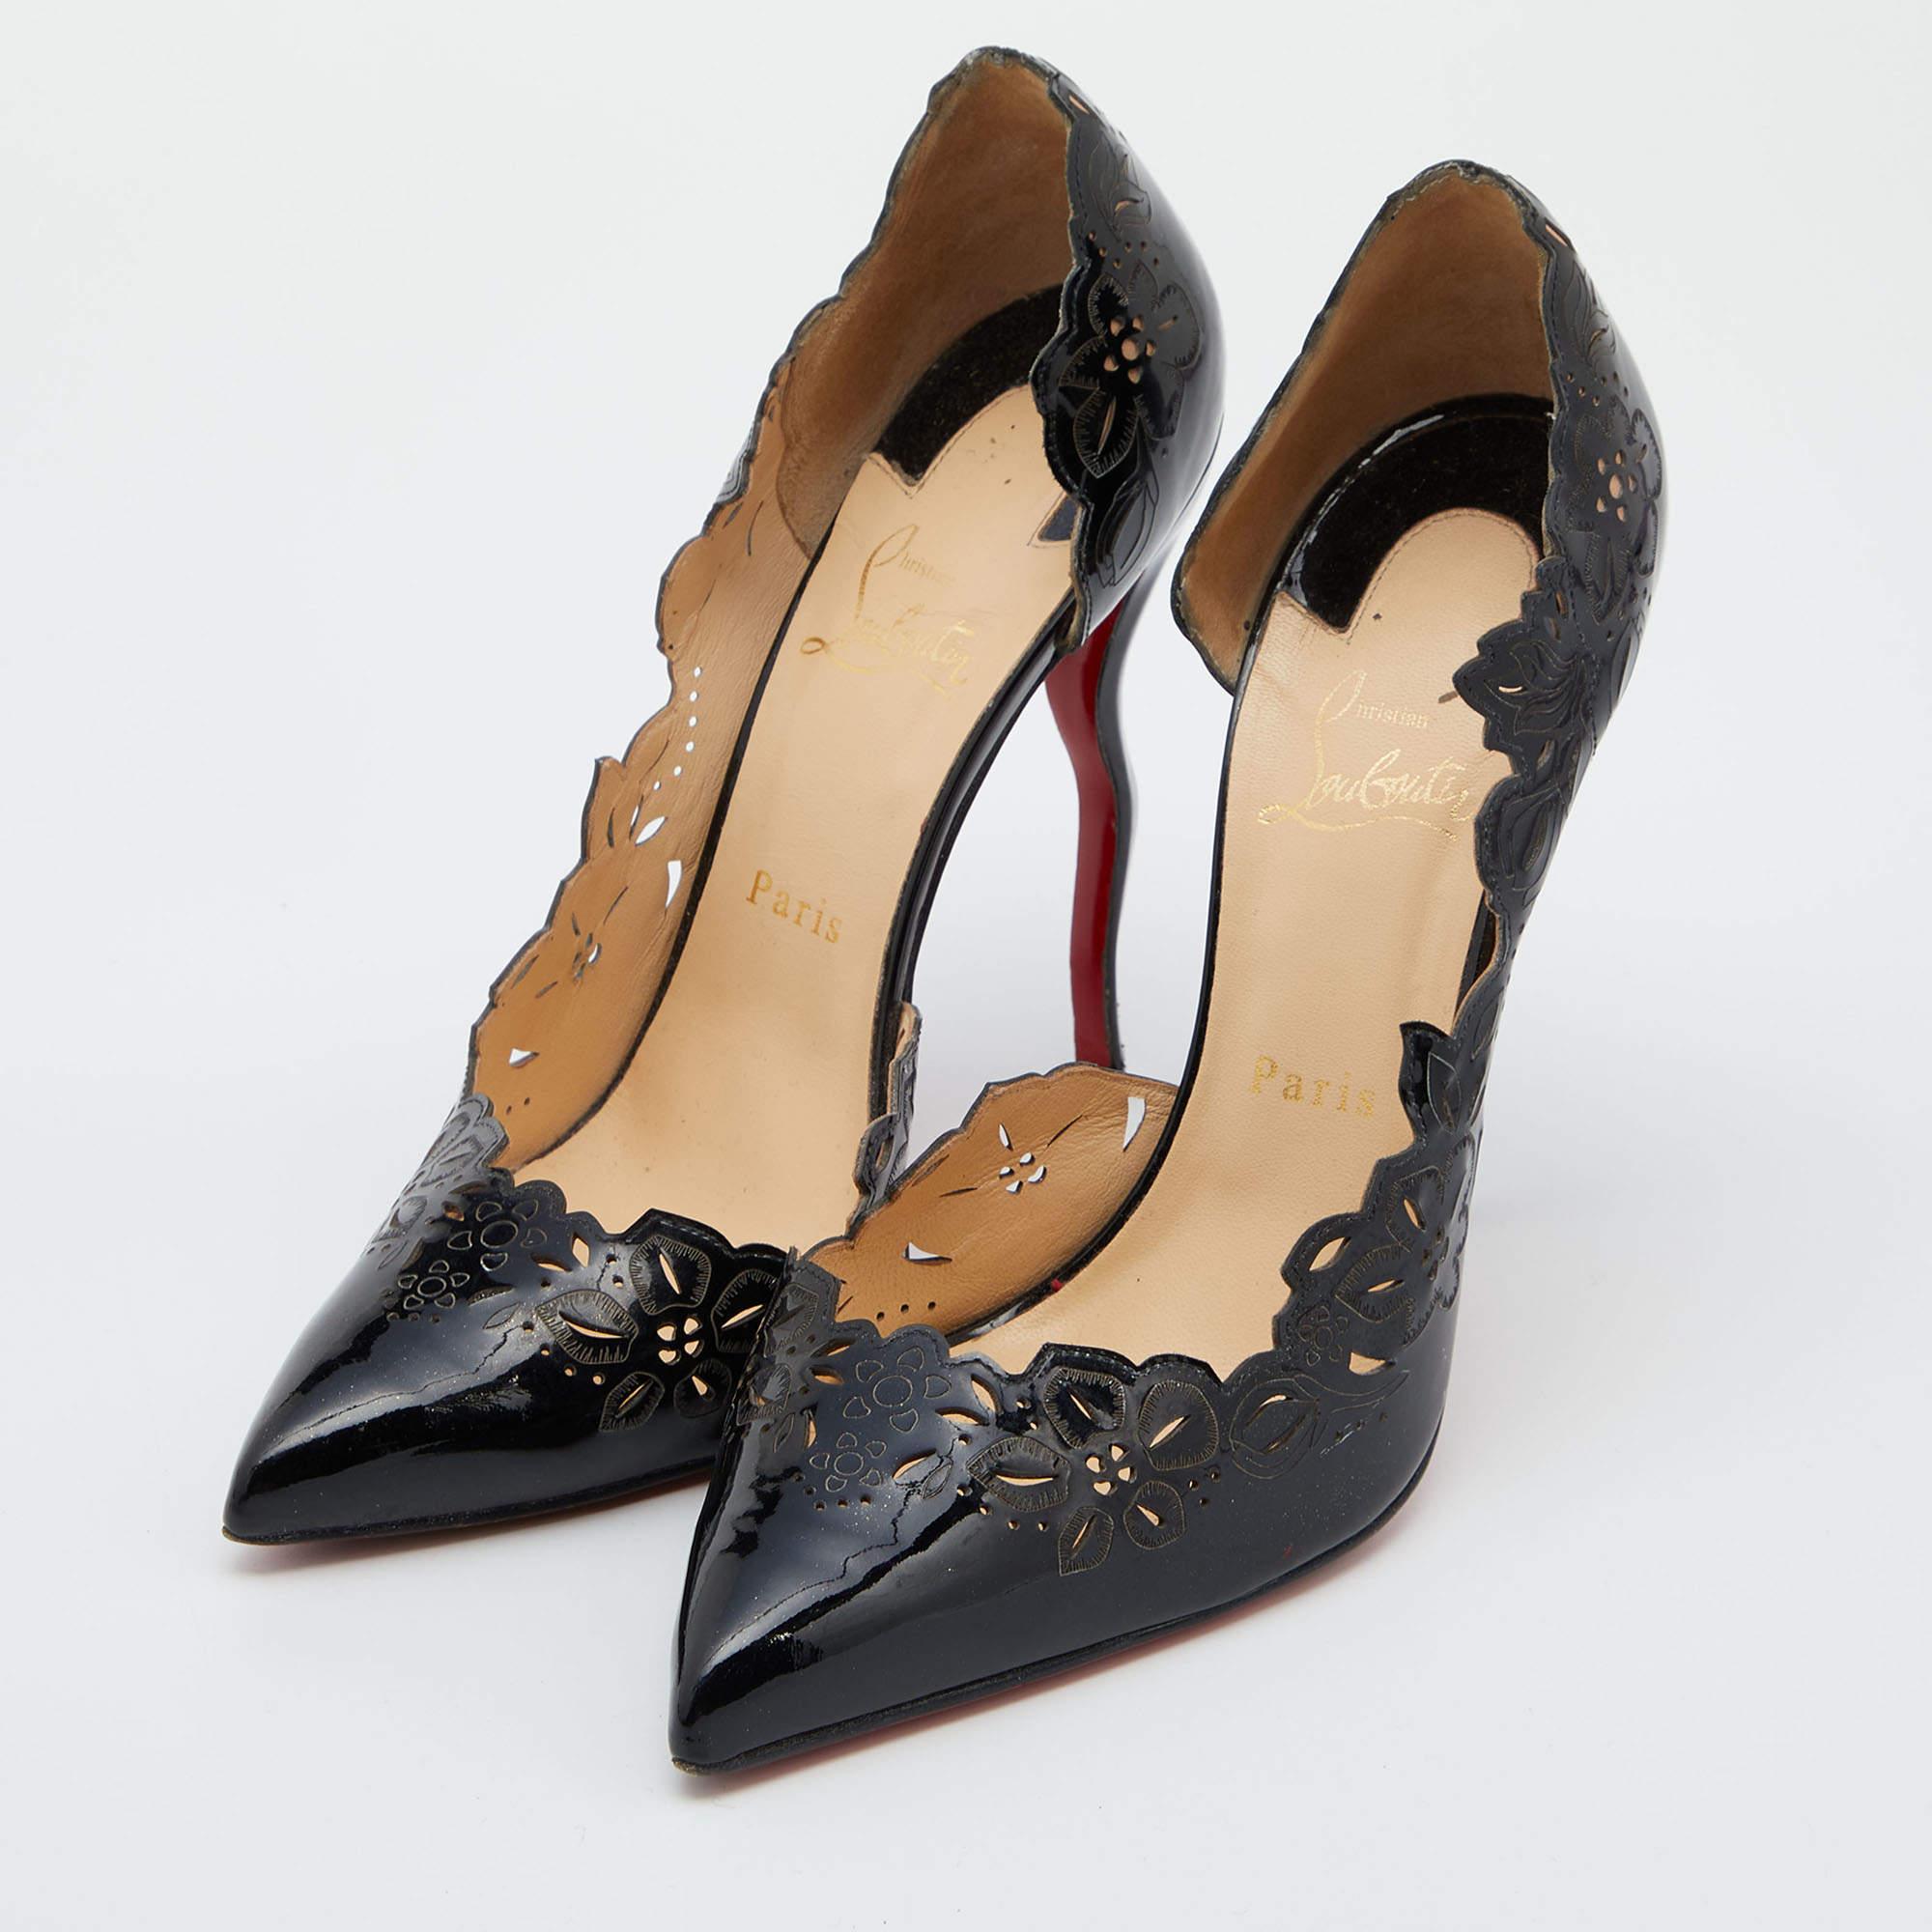 Women's Christian Louboutin Black Patent Leather Beloved Pumps Size 40 For Sale